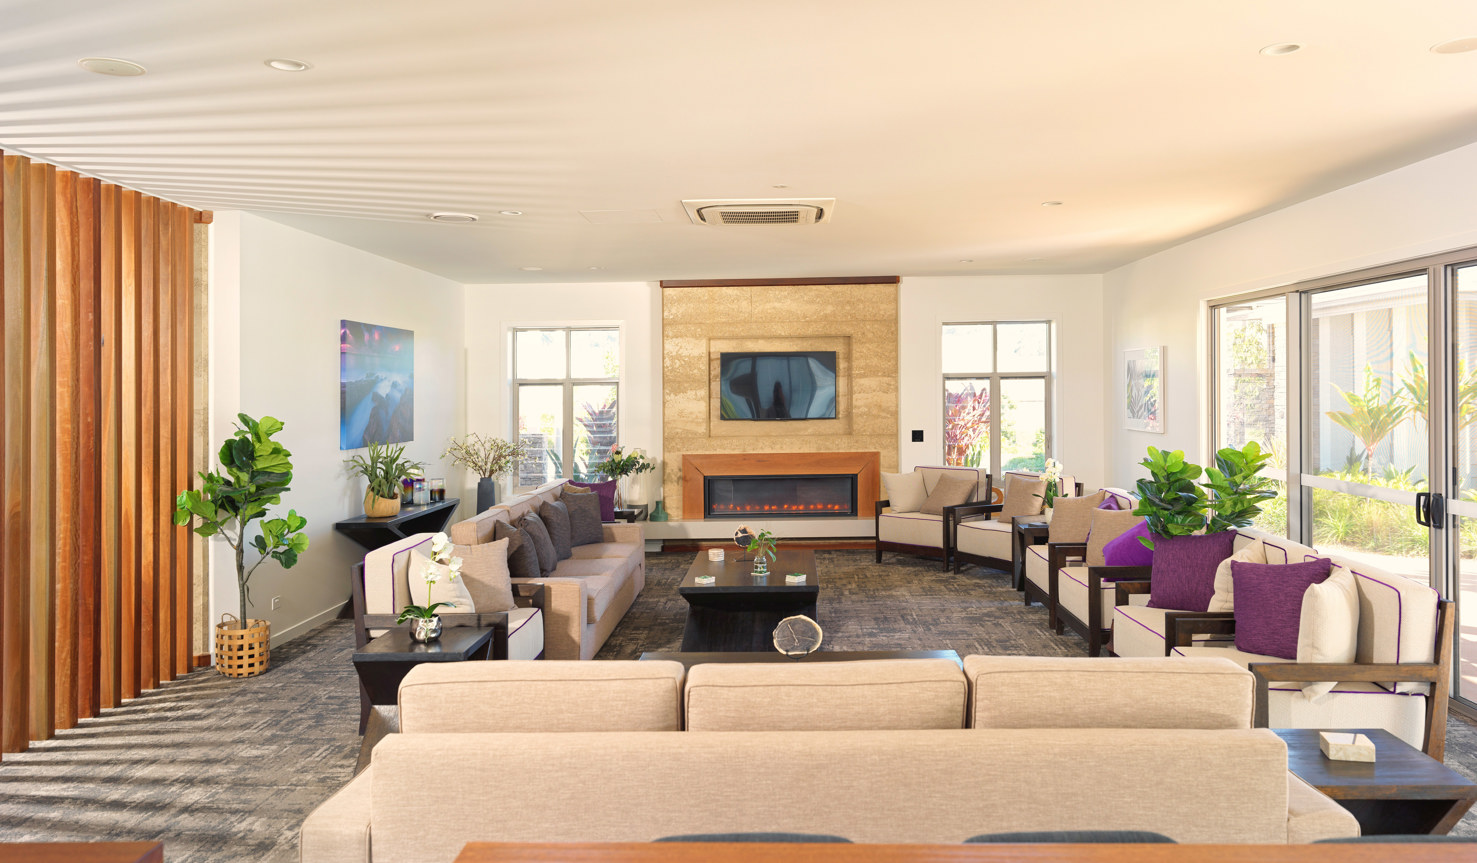 Halcyon Lakeside Recreational club lounge area with fireplace